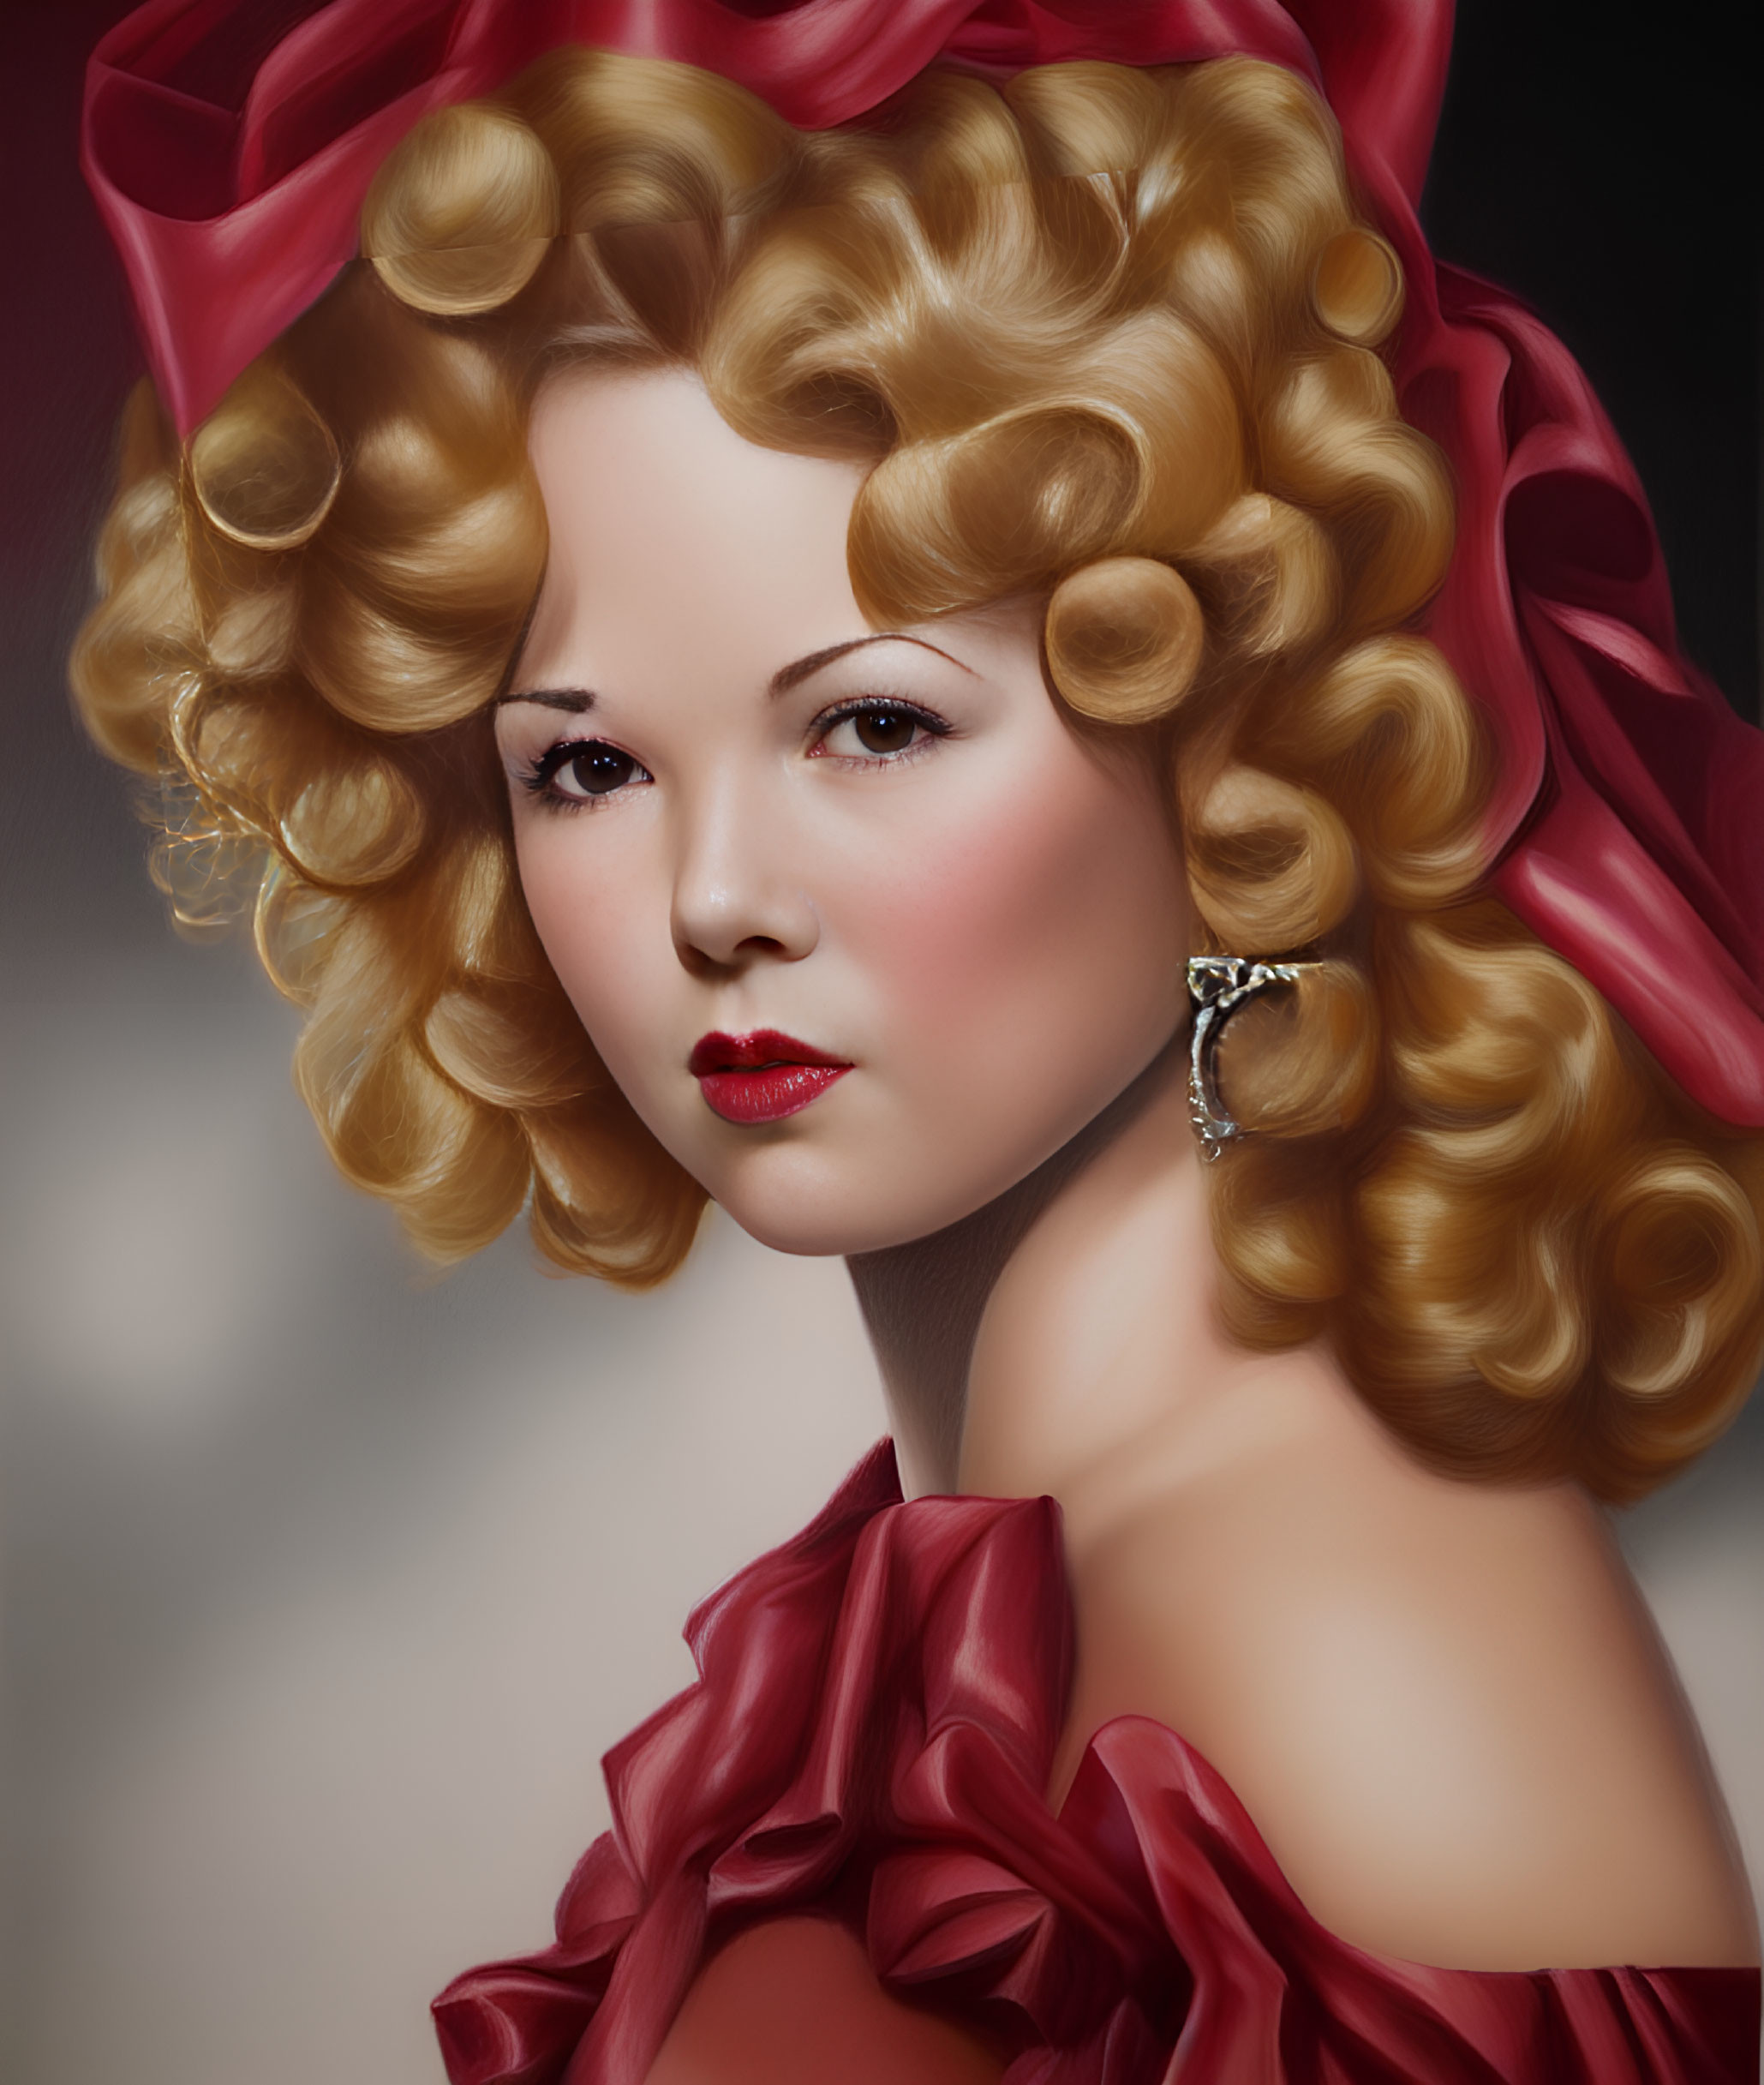 Woman with Voluminous Golden Curls and Red Ribbon Accents in Ruffled Garment